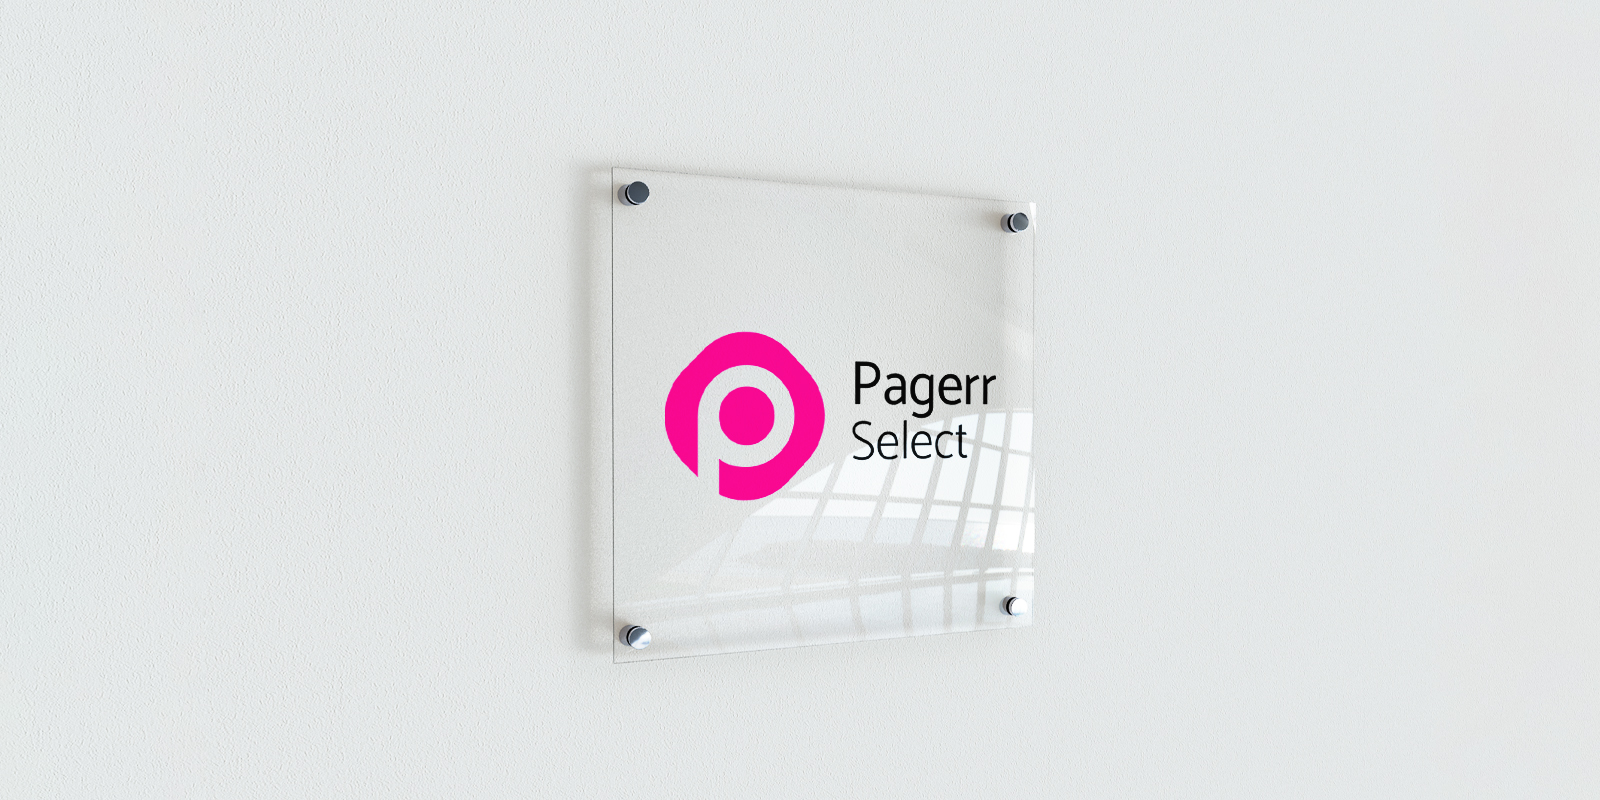 Acrylic signs in Perth - Print with Pagerr